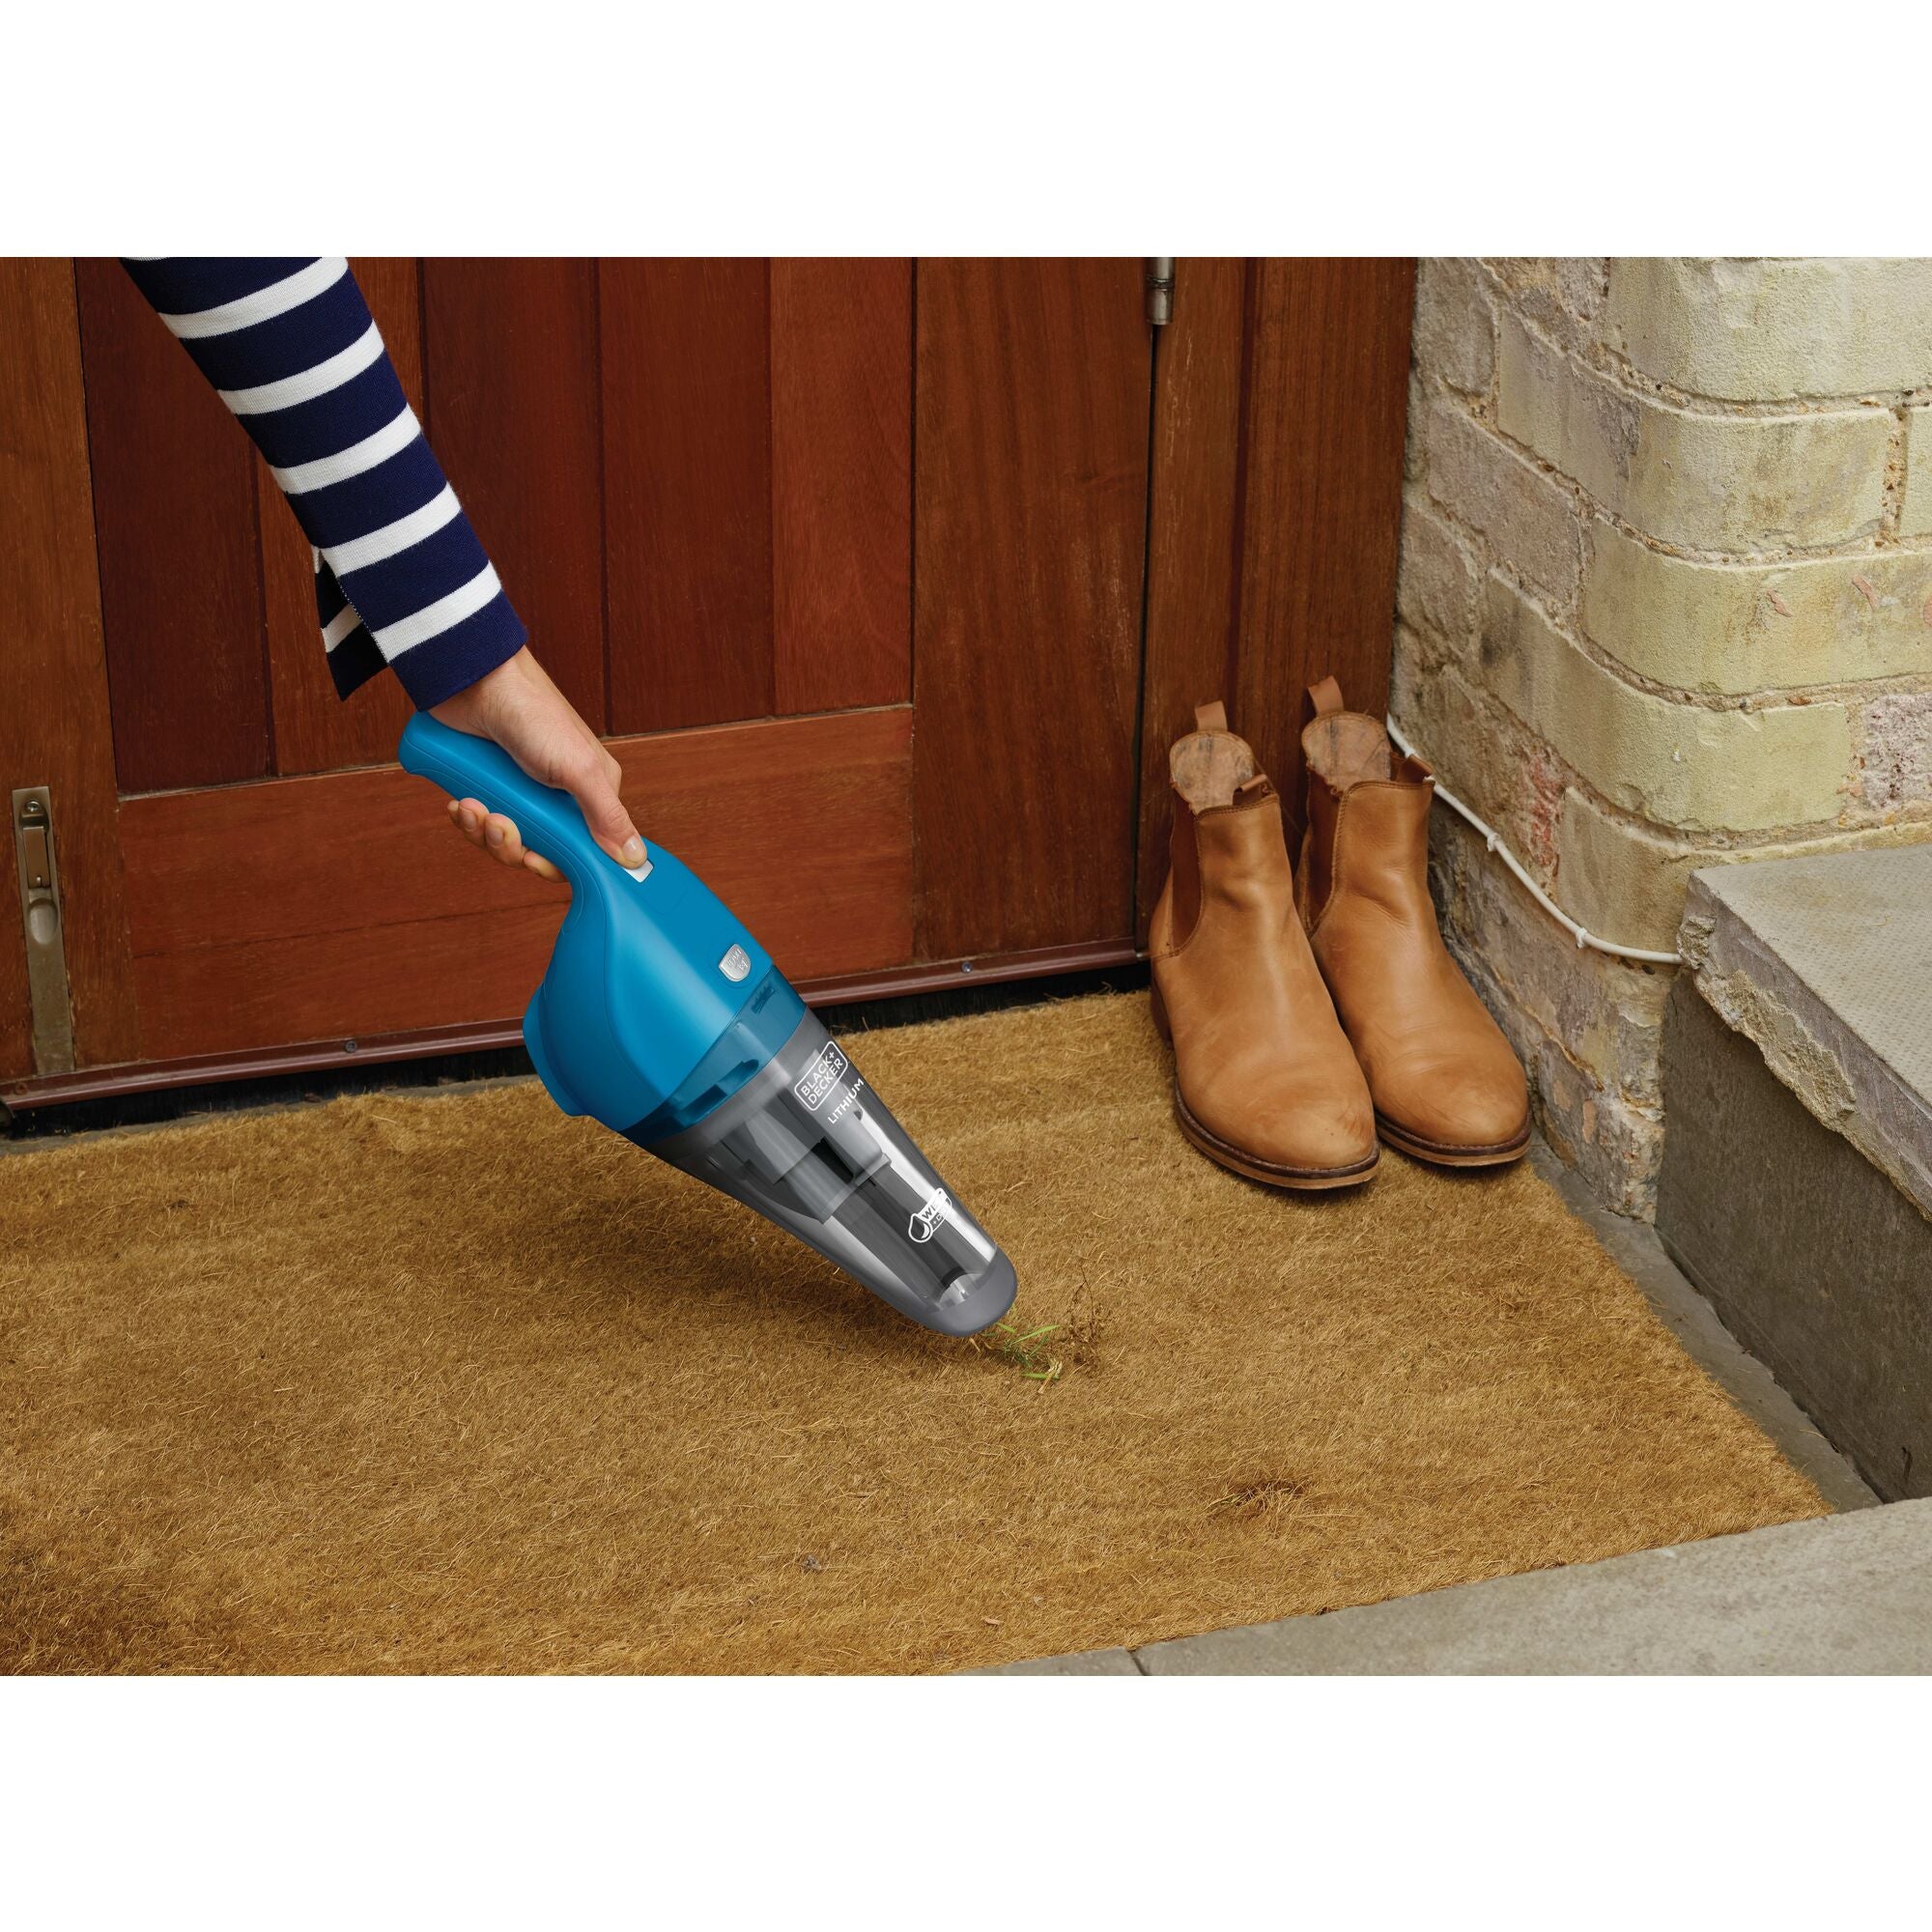 Dustbuster quickclean cordless hand vacuum wet and dry being used to vacuum mud from the doormat.